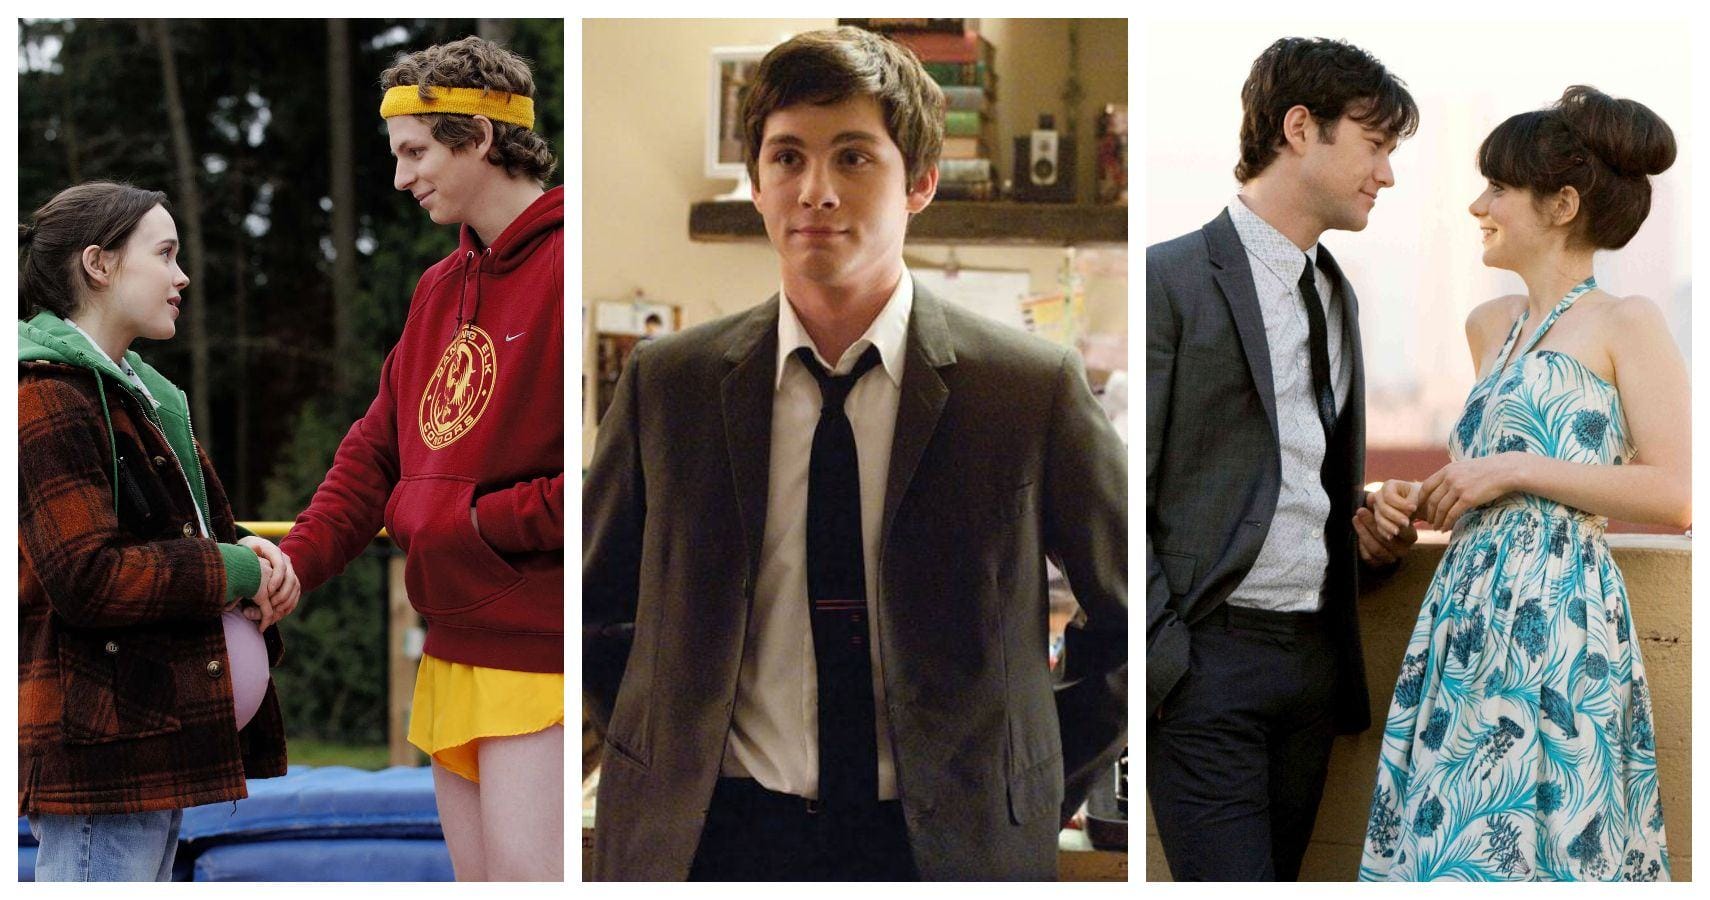 10 Movies To Watch If You Love The Perks Of Being A Wallflower